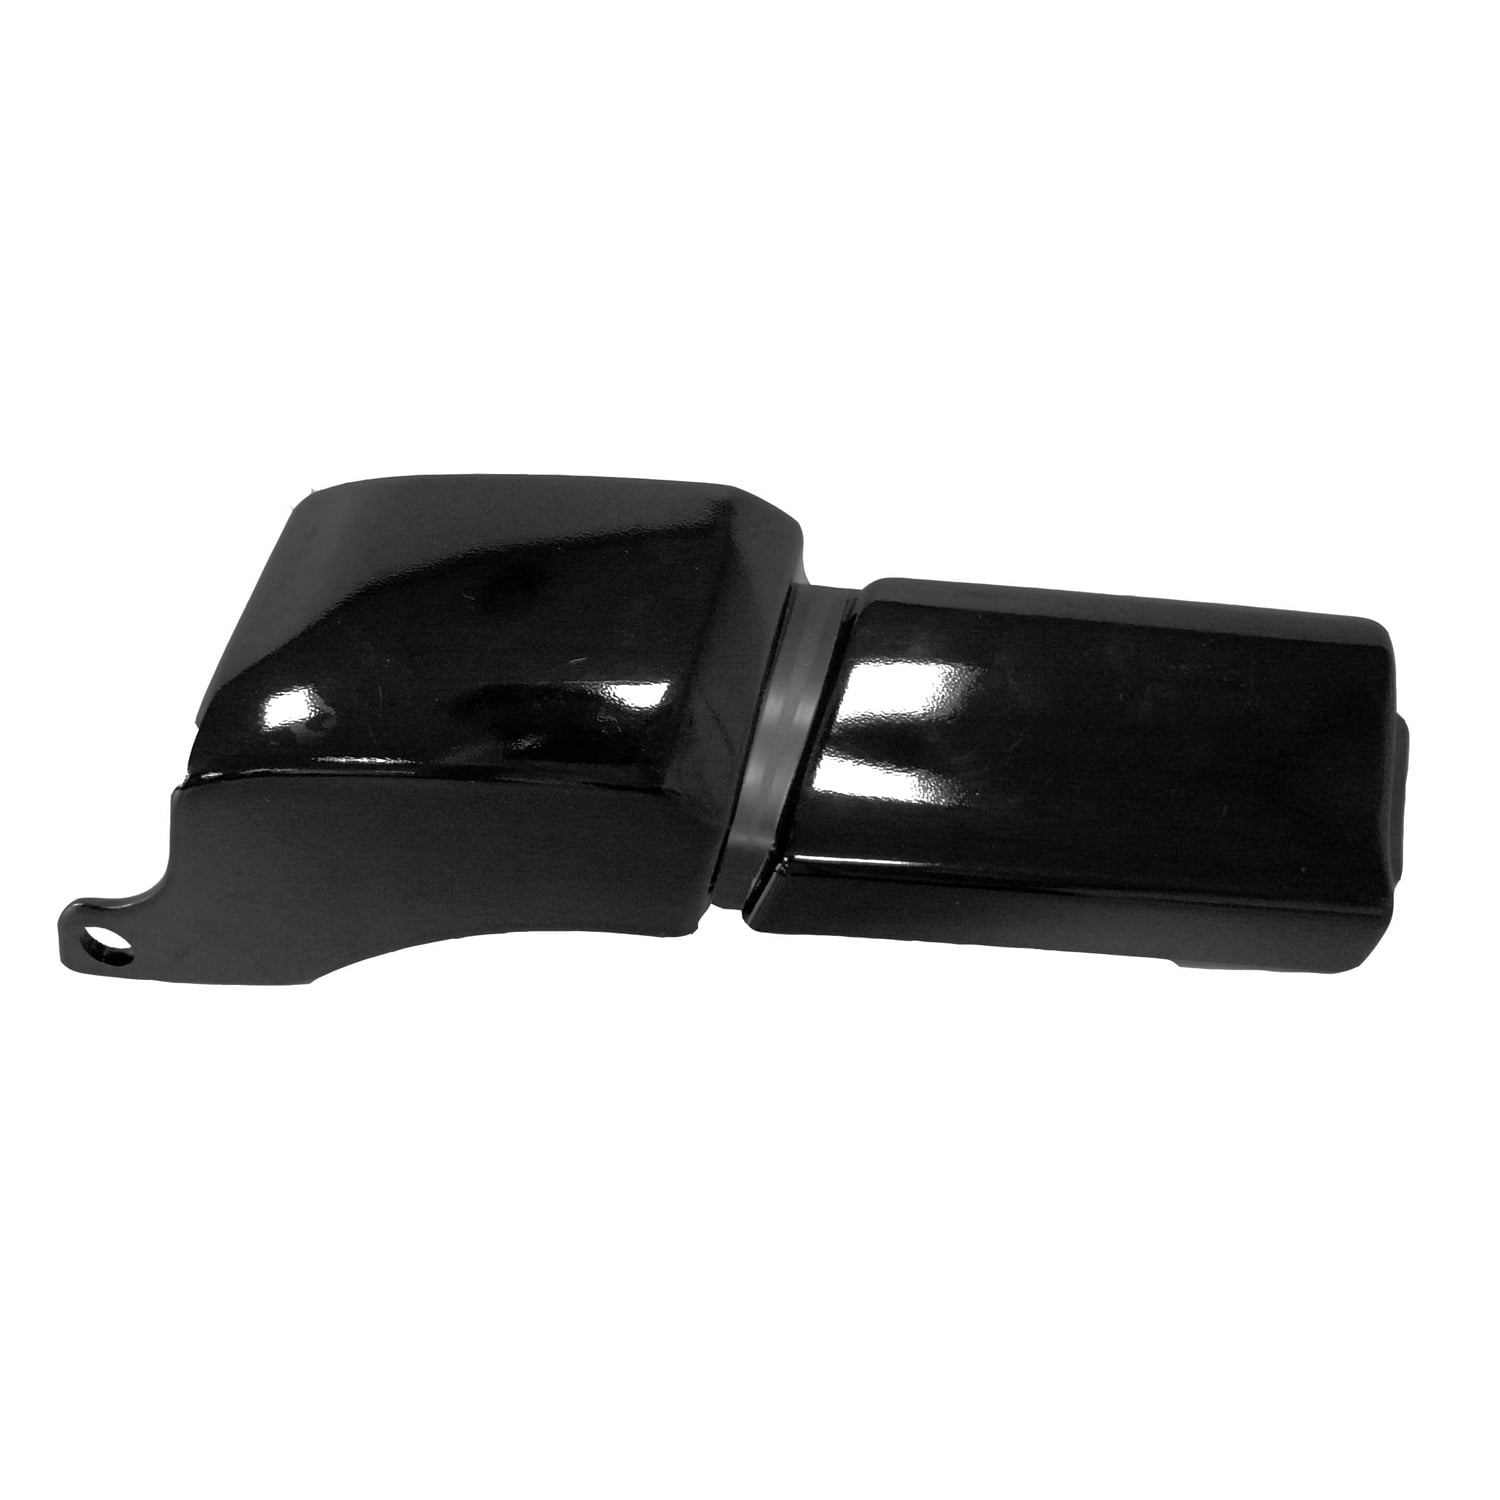 Base/SR5 Models TO1029103 5392535020C0 Black New Front Bumper Tow Hook Cover For 1996-2002 Toyota 4Runner Retainer Cover 